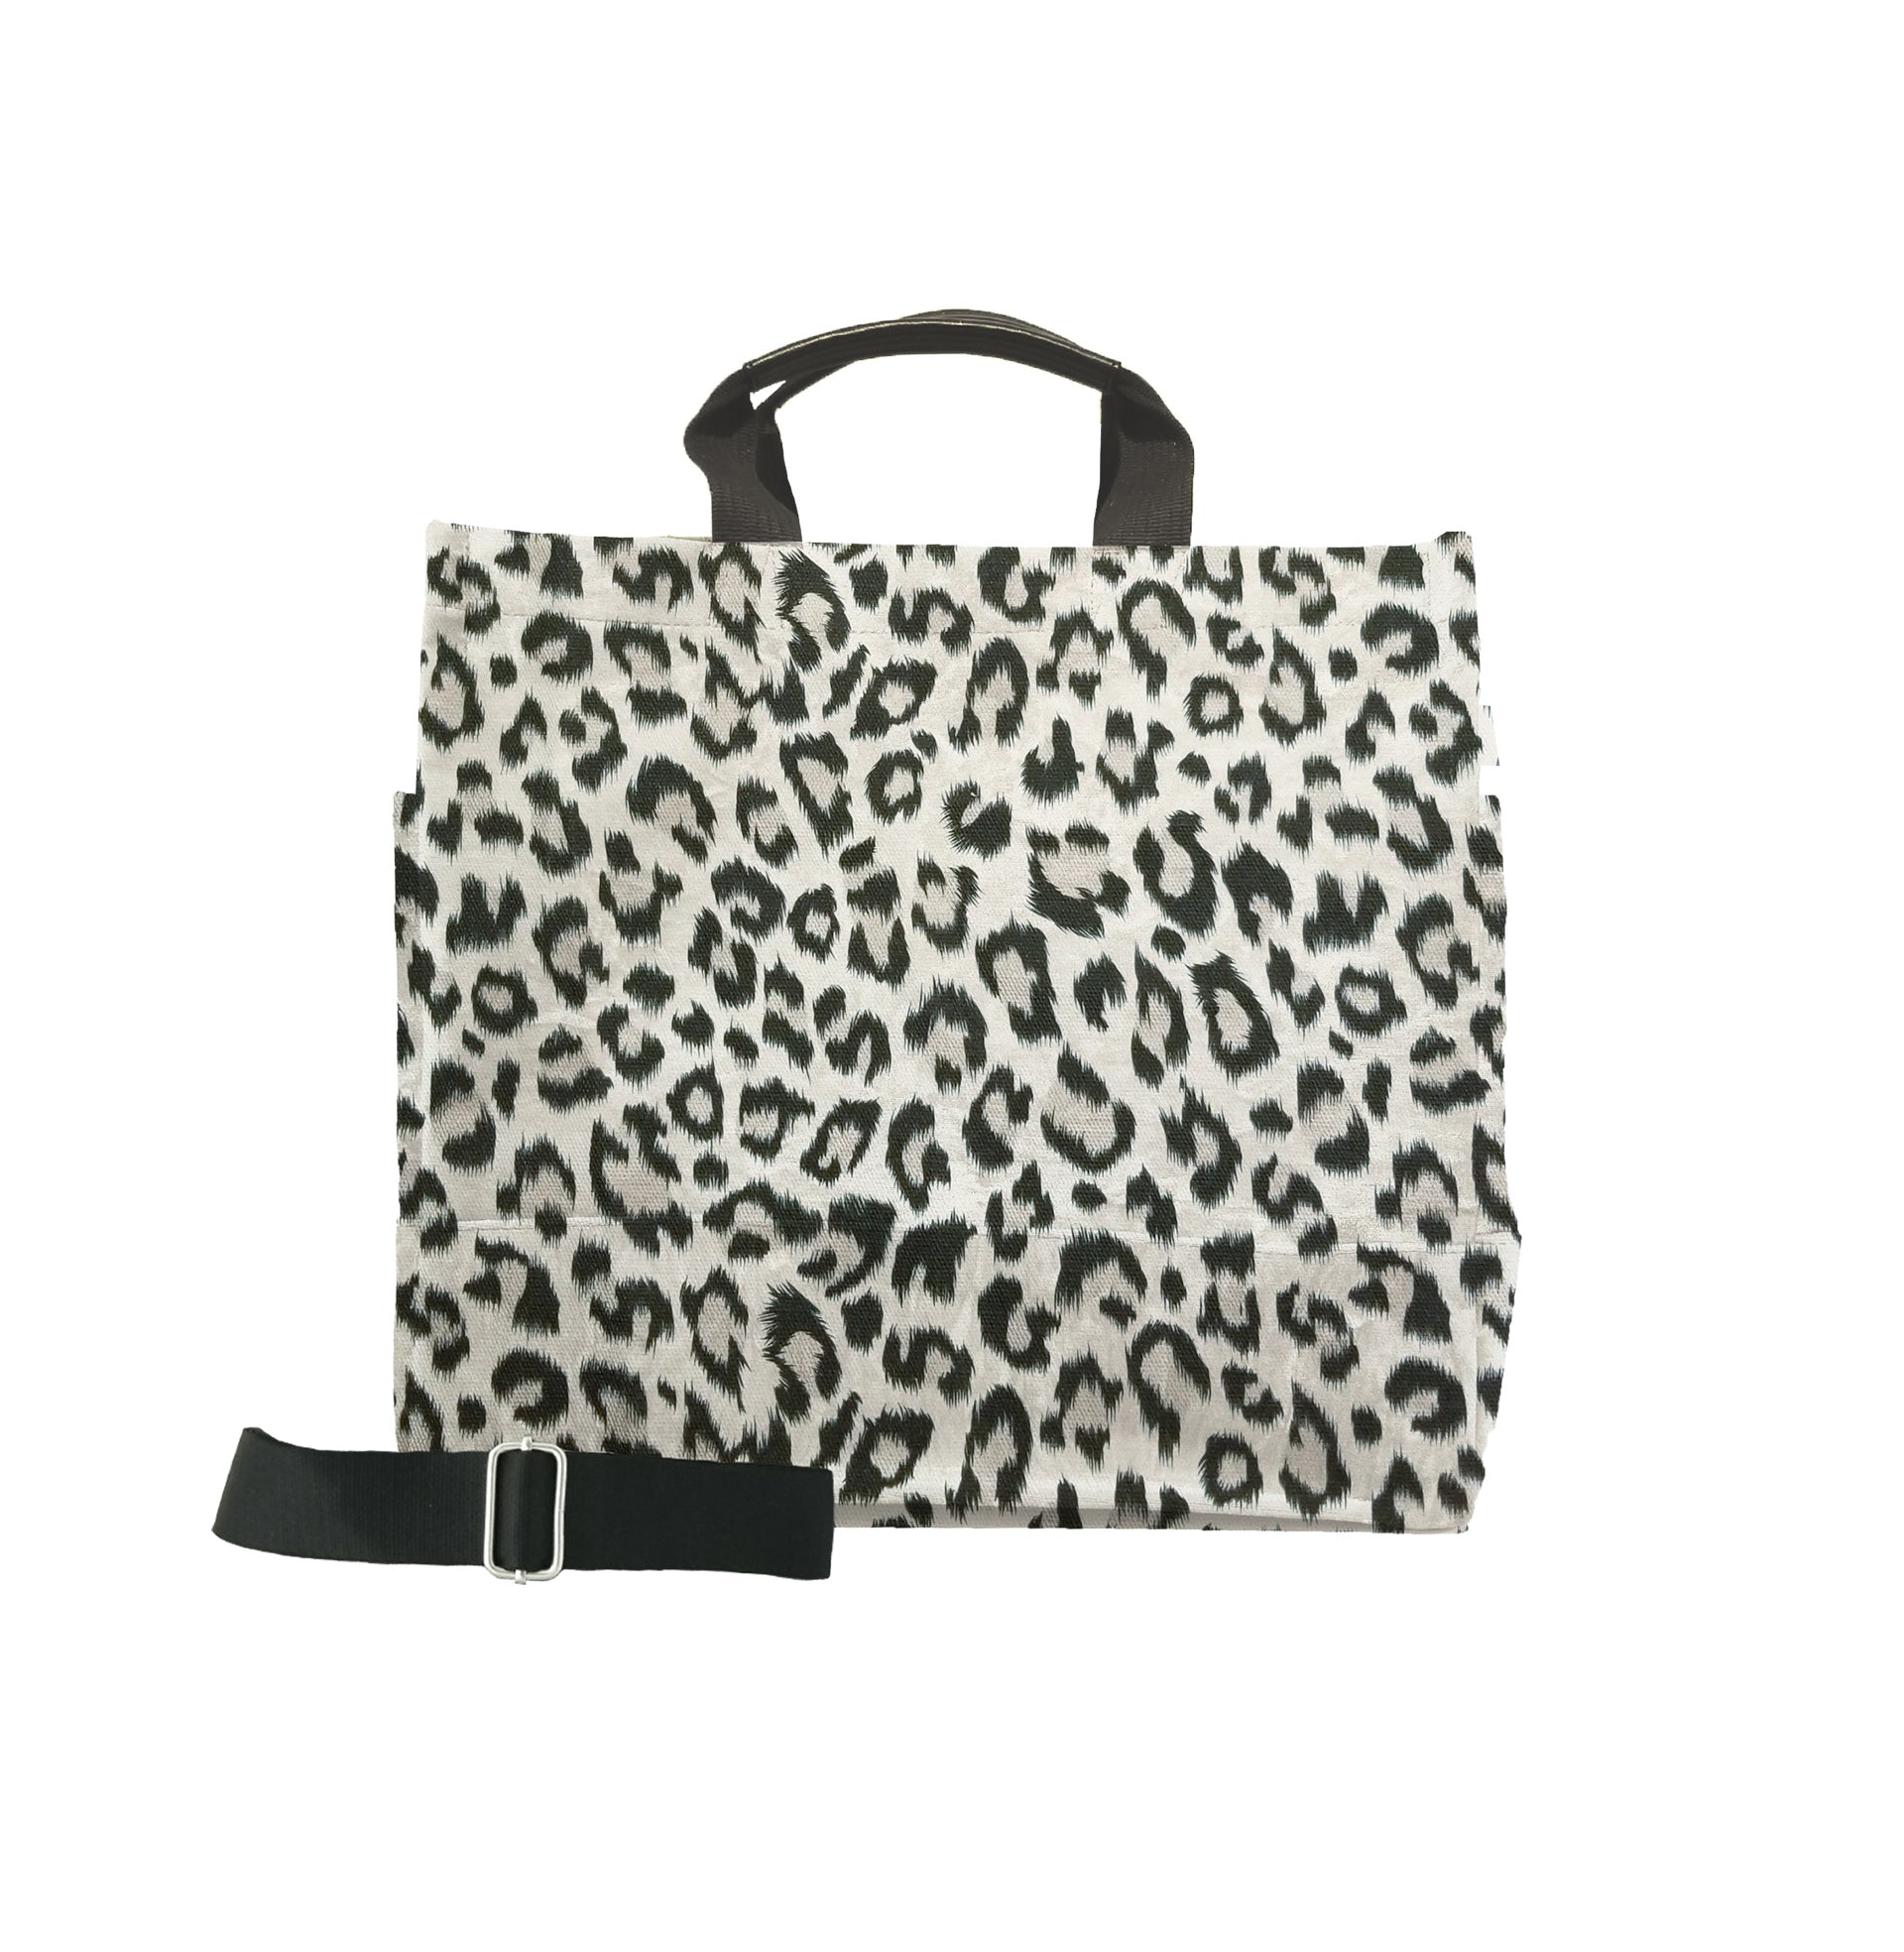 Luxe North South Bag: Grey Leopard with Silver and Gold Stripes